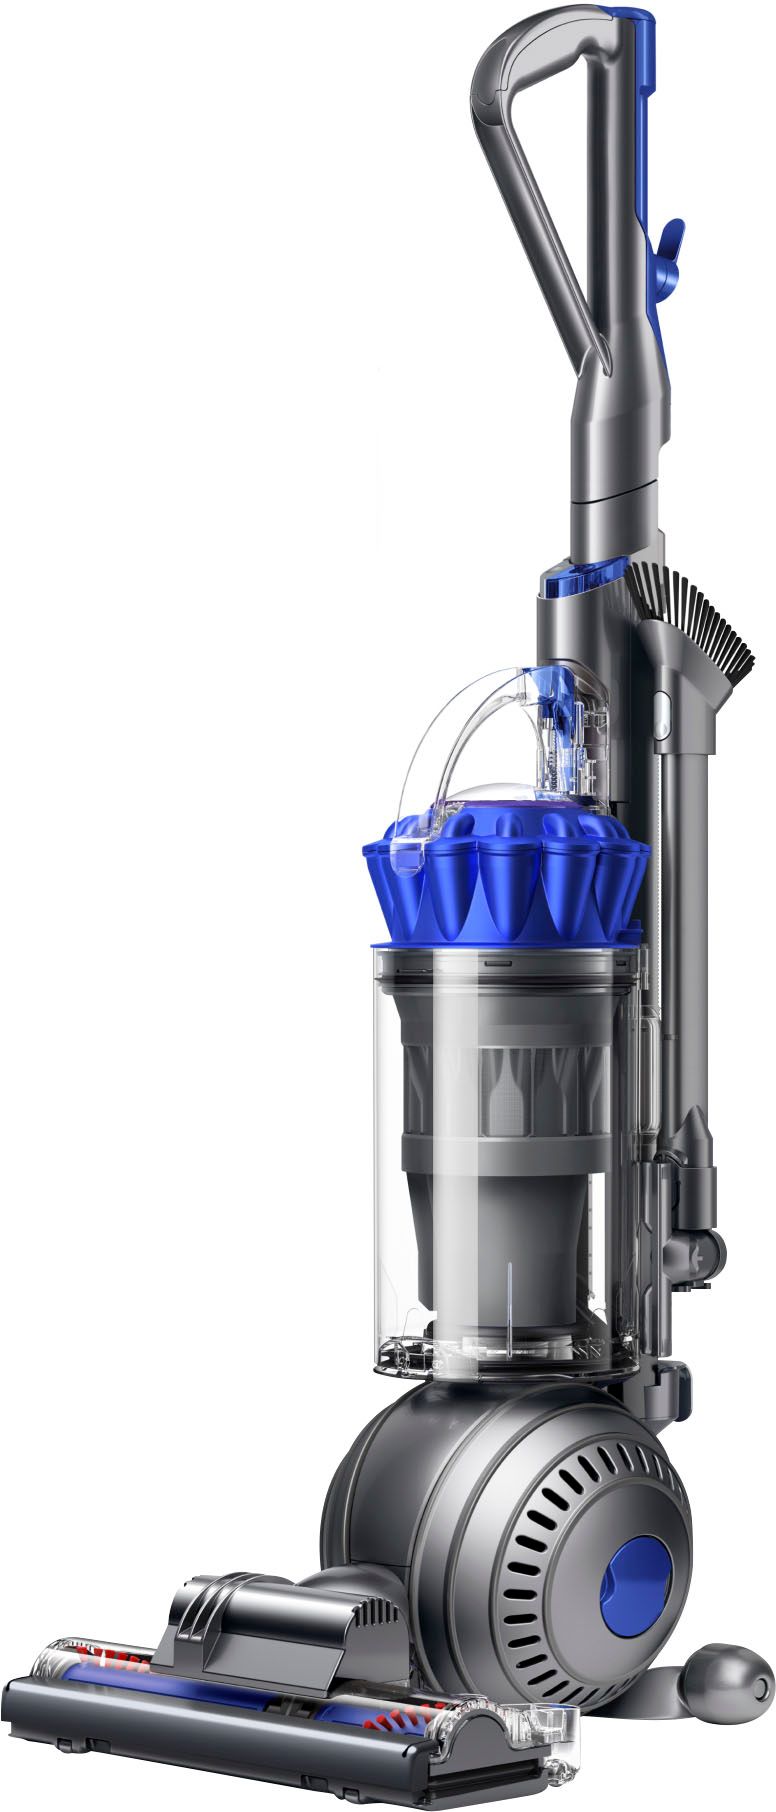 Dyson Ball Allergy Plus Upright Vacuum Moulded Blue/Iron 447961-01 - Best Buy | Best Buy U.S.